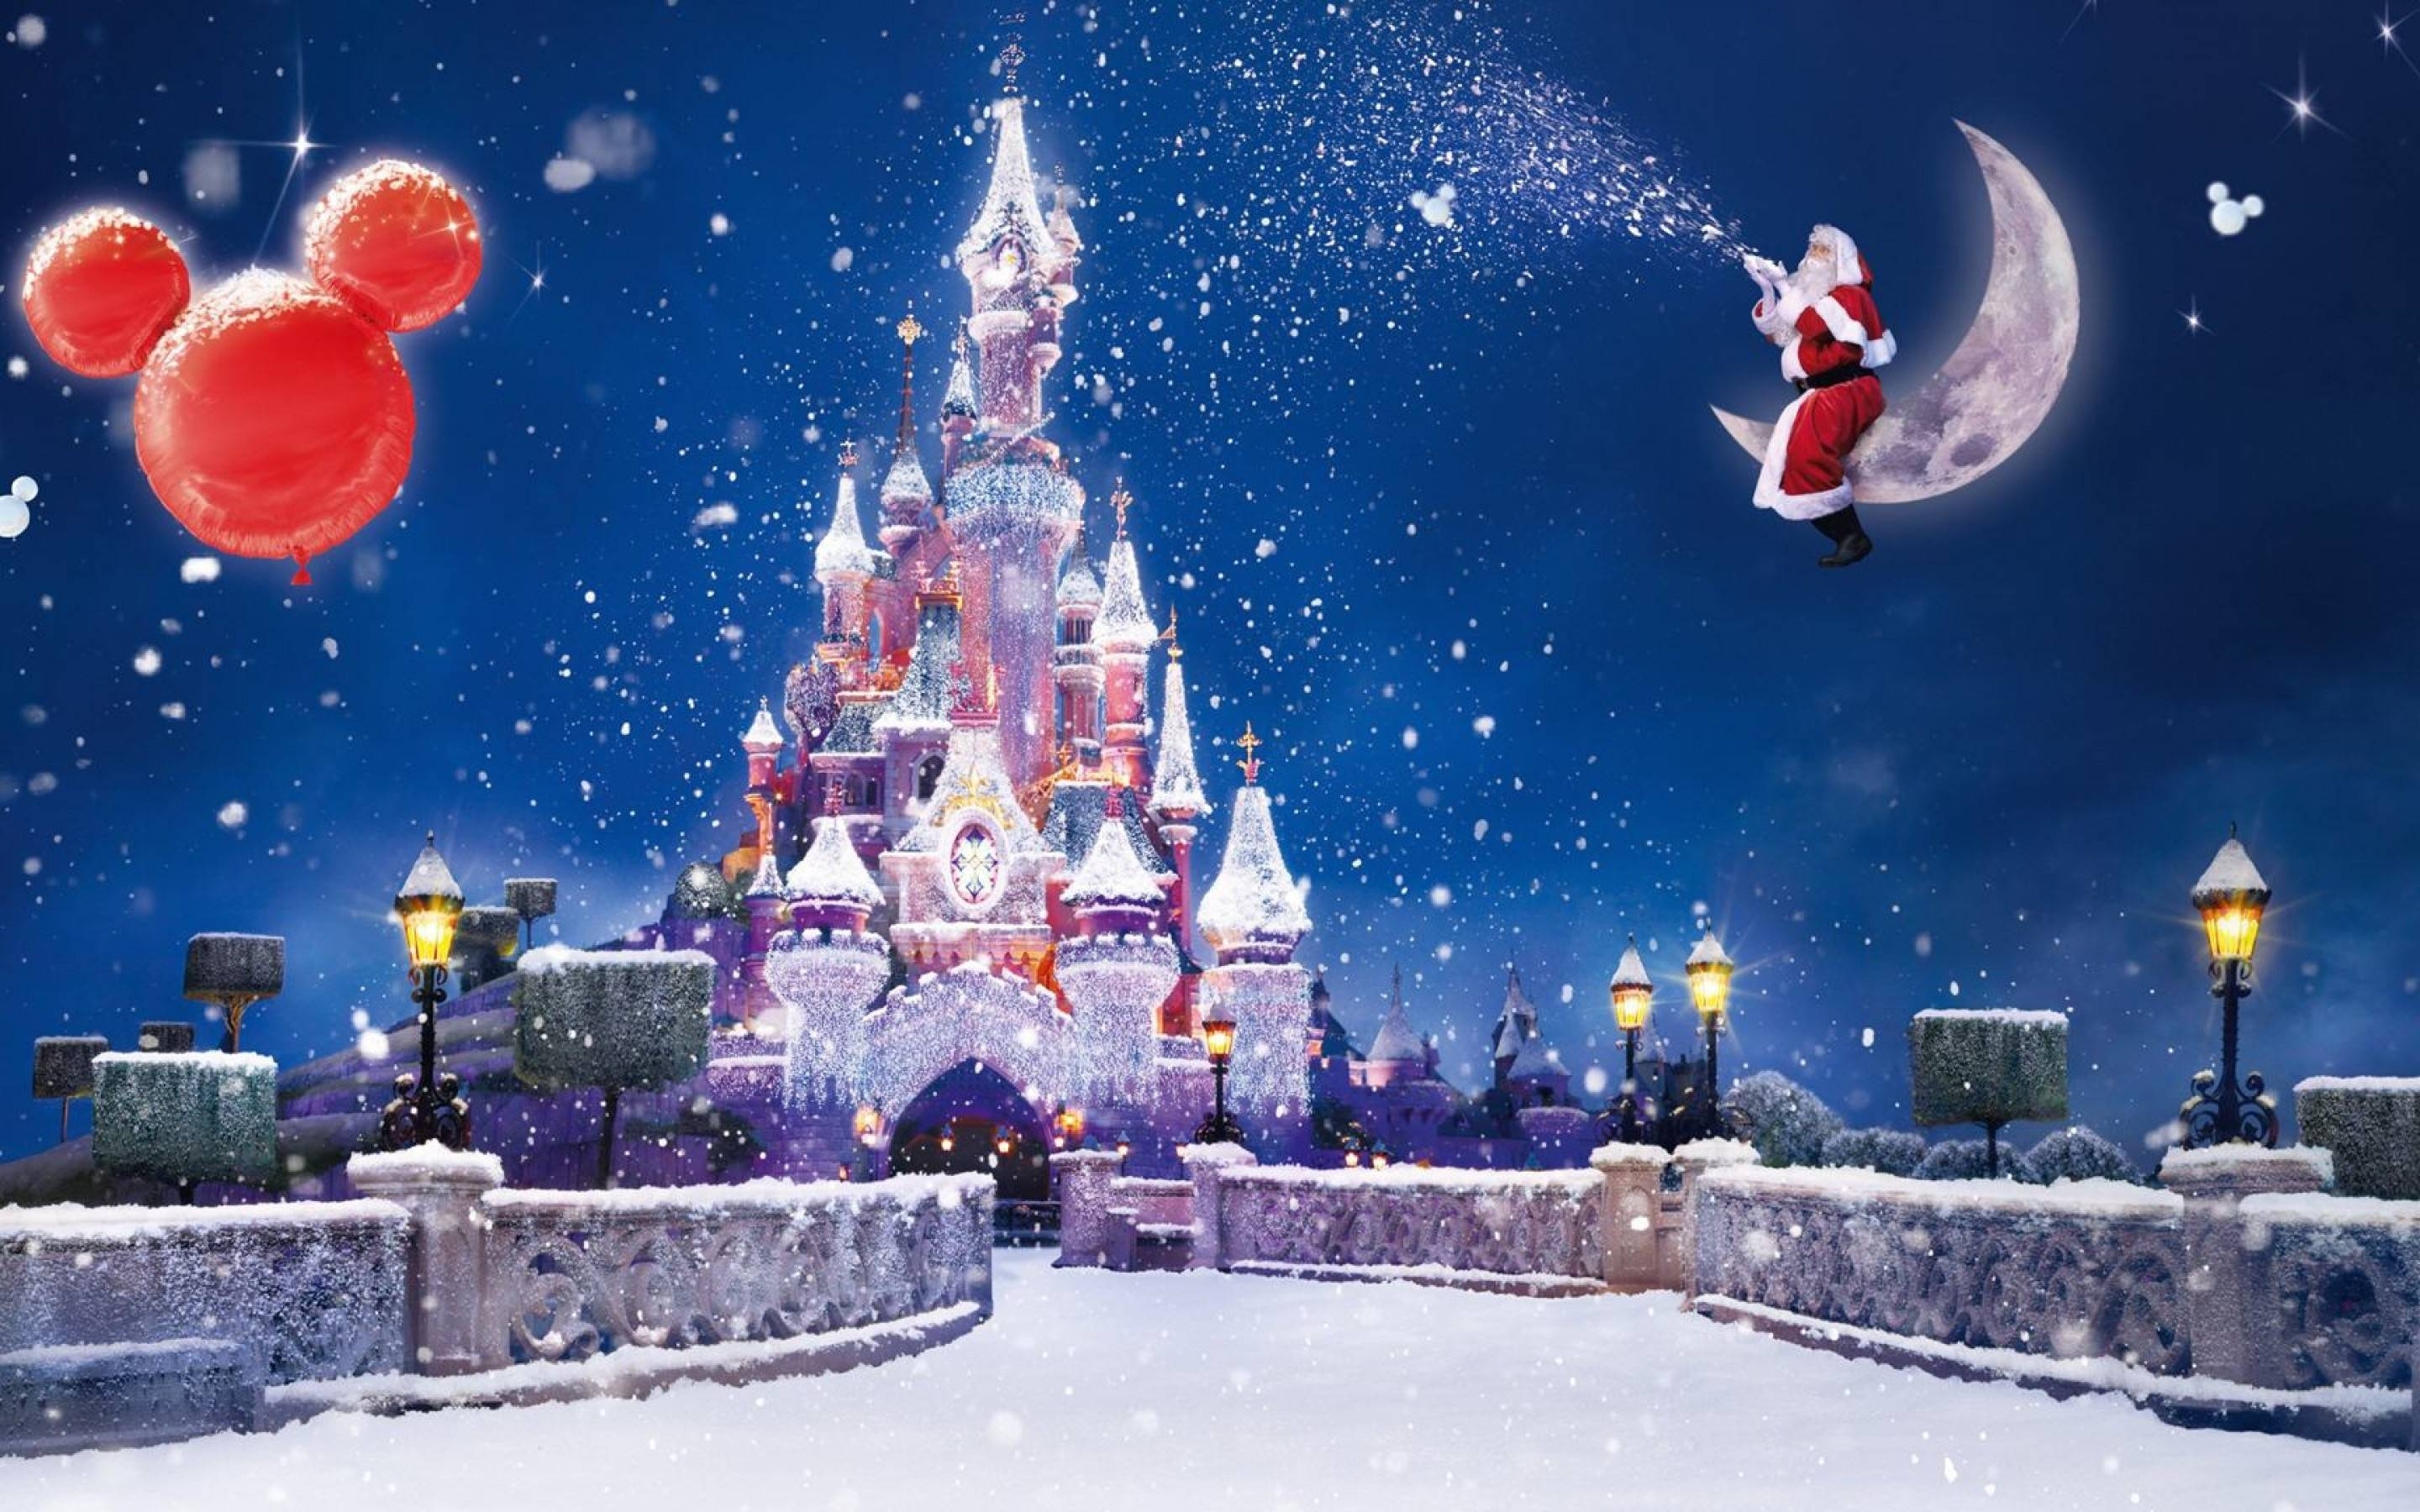 10 Latest Disney Christmas Images Wallpaper FULL HD 1920×1080 For PC Background